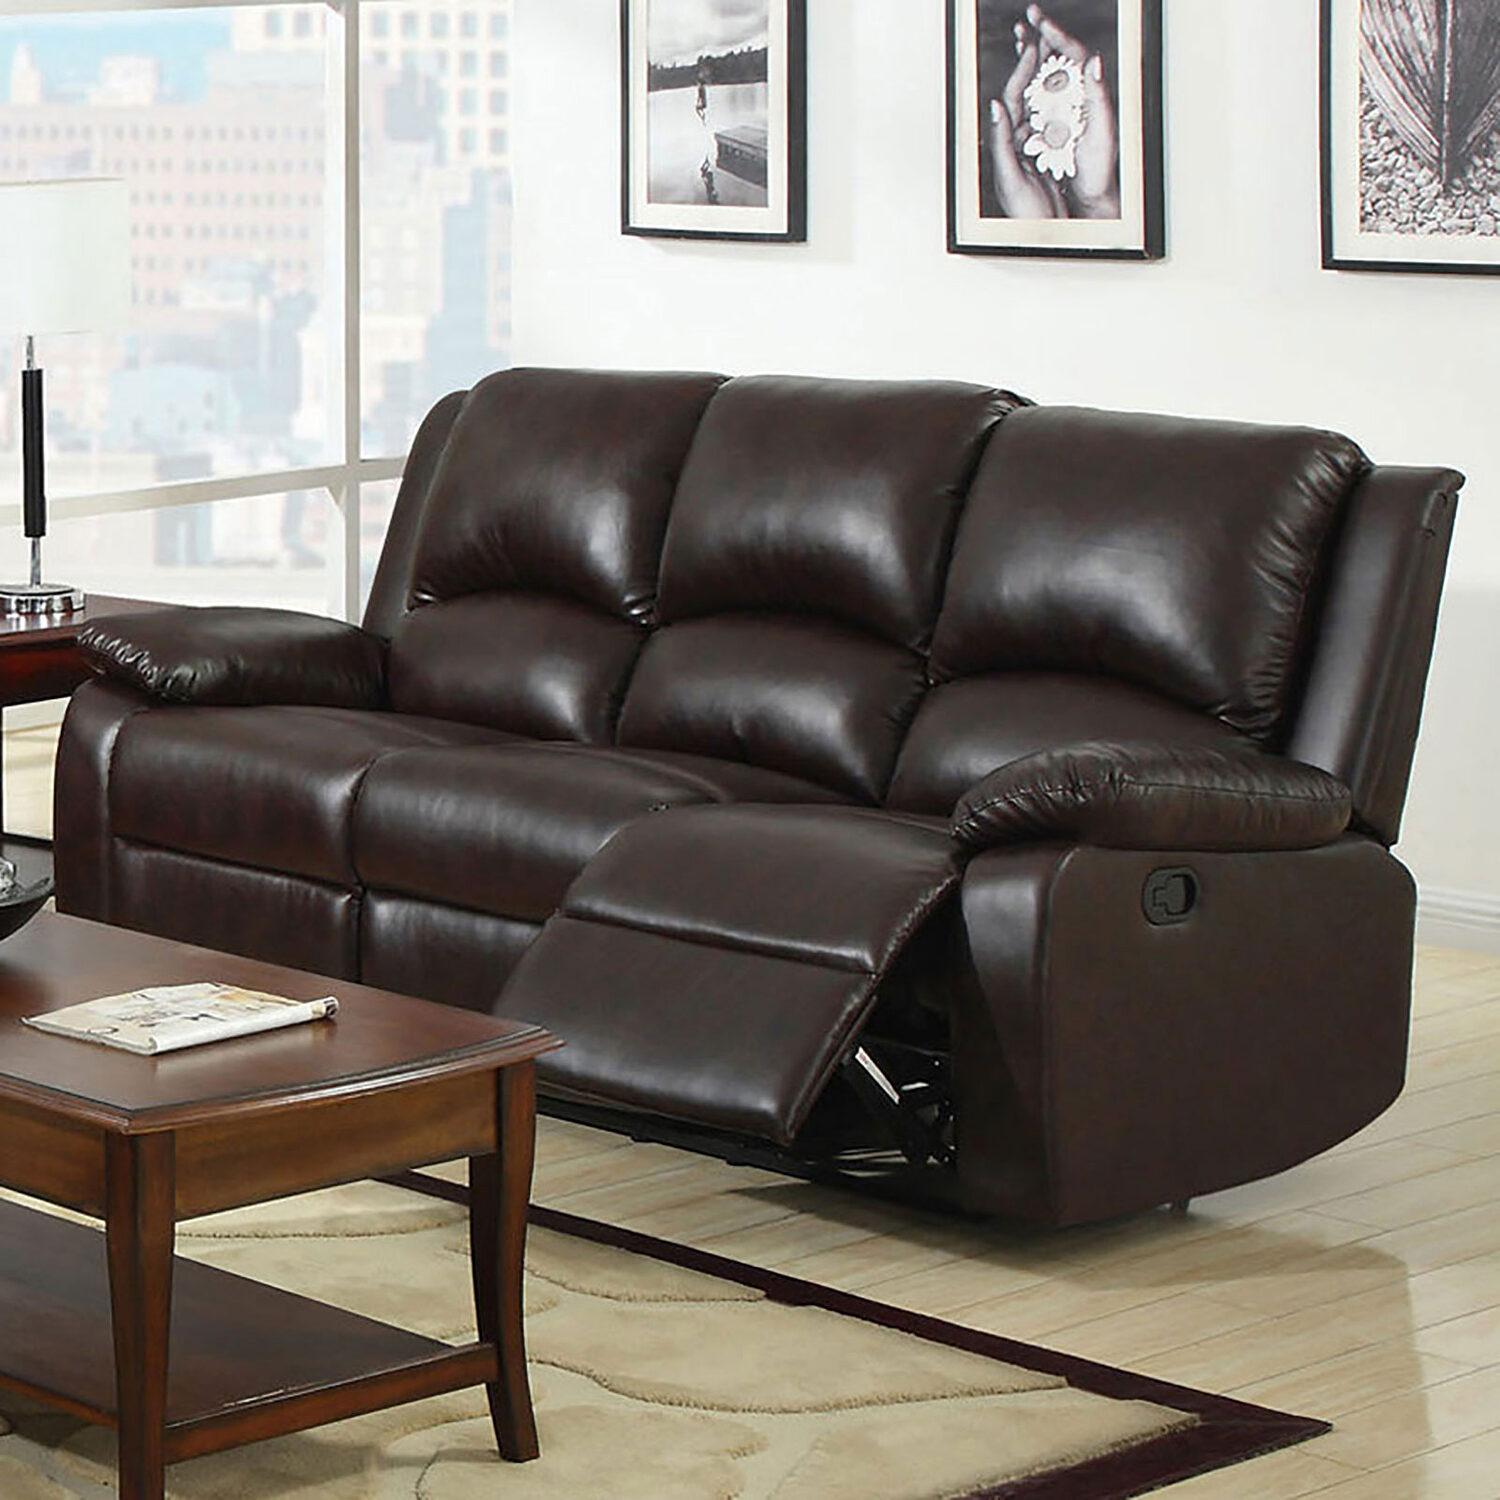 Transitional Recliner Sofa OXFORD CM6555-S CM6555-S in Dark Brown Leatherette